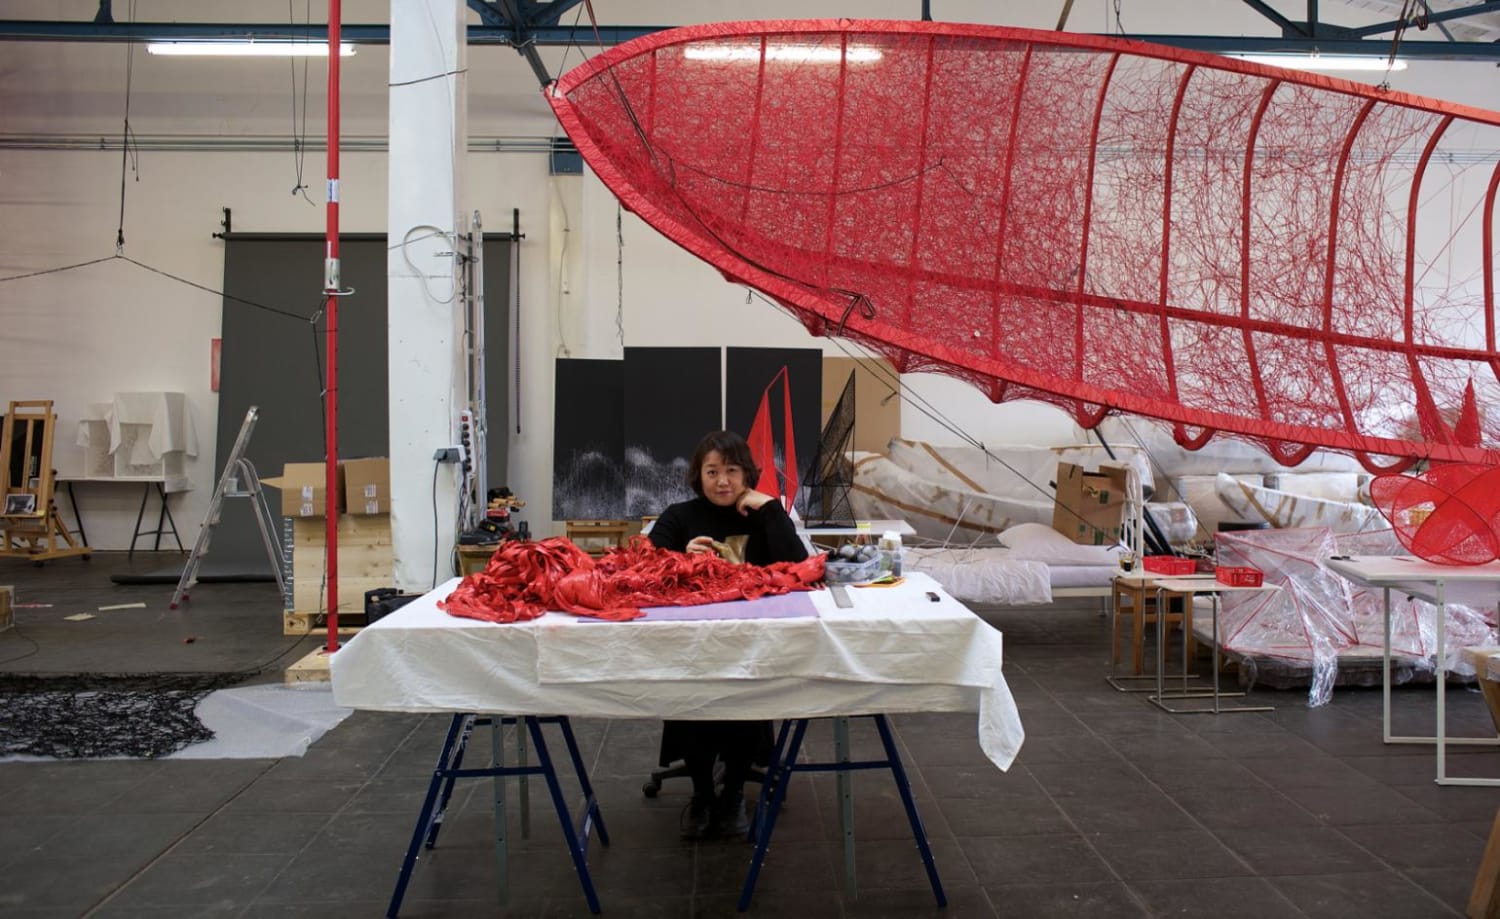 At home with artist Chiharu Shiota